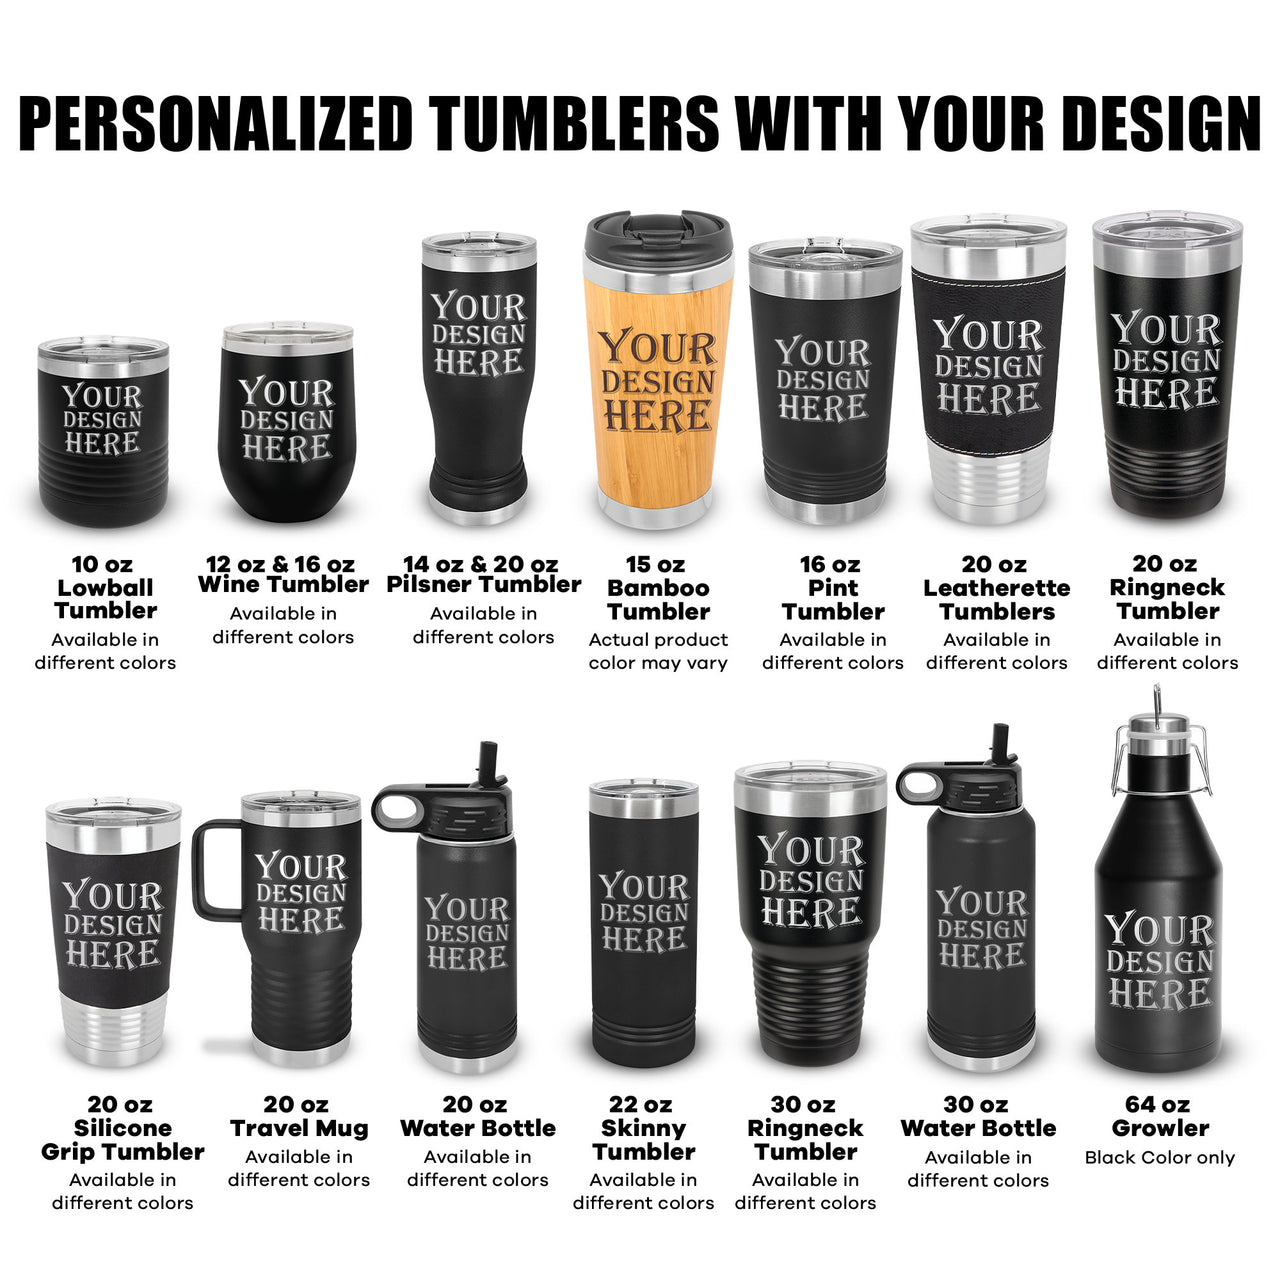 American Tumbler Gift, Personalized Tumbler America Love It - Live It or Get the Hell Out Tumbler, Funny Tumbler Collection Gift for Patriot